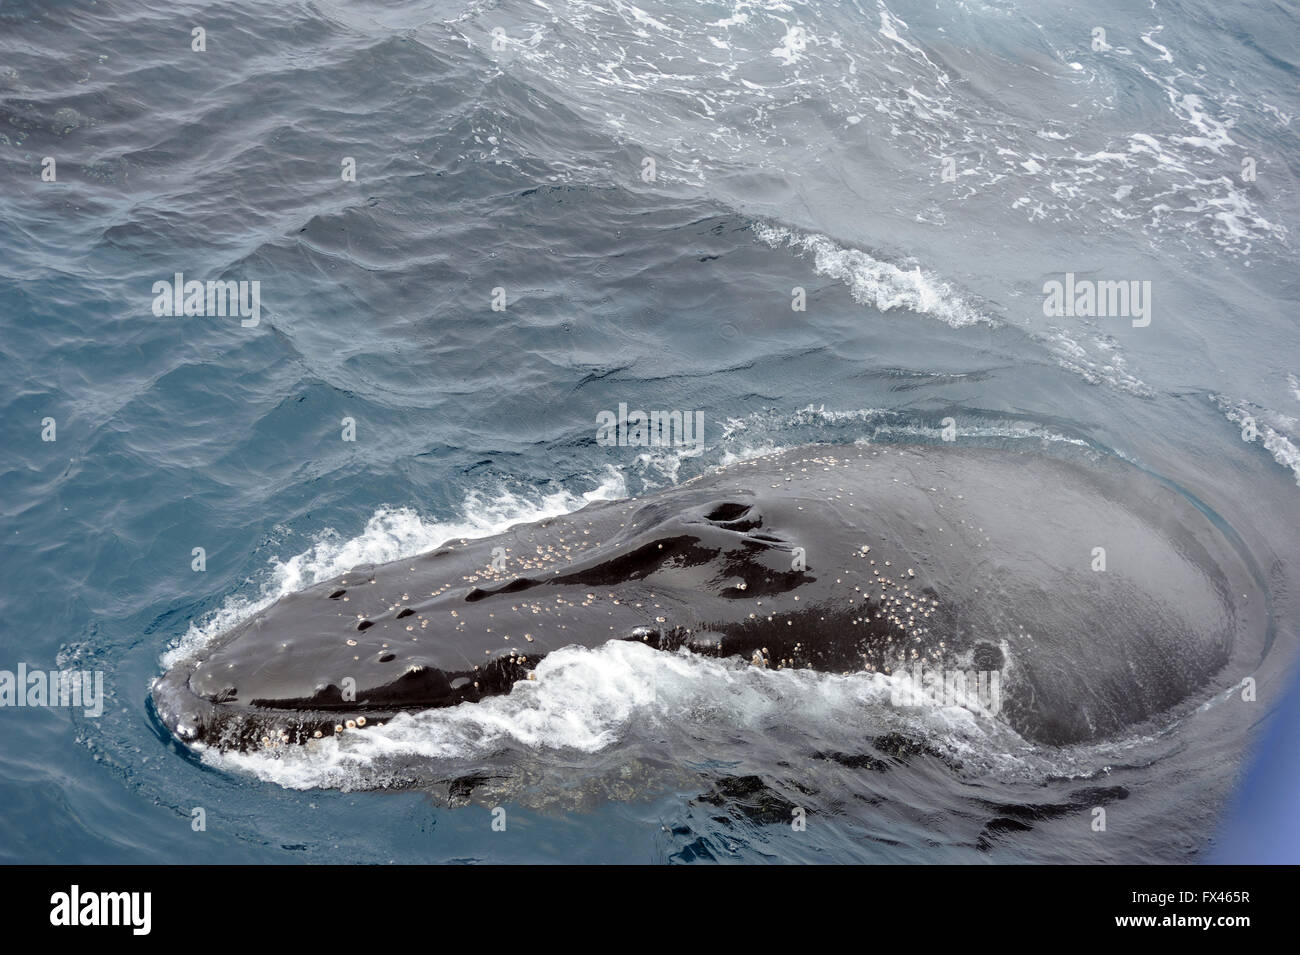 A Humpback whale surfaces (Megaptera novaeangliae) South Sandwich Islands, Southern Ocean. Stock Photo